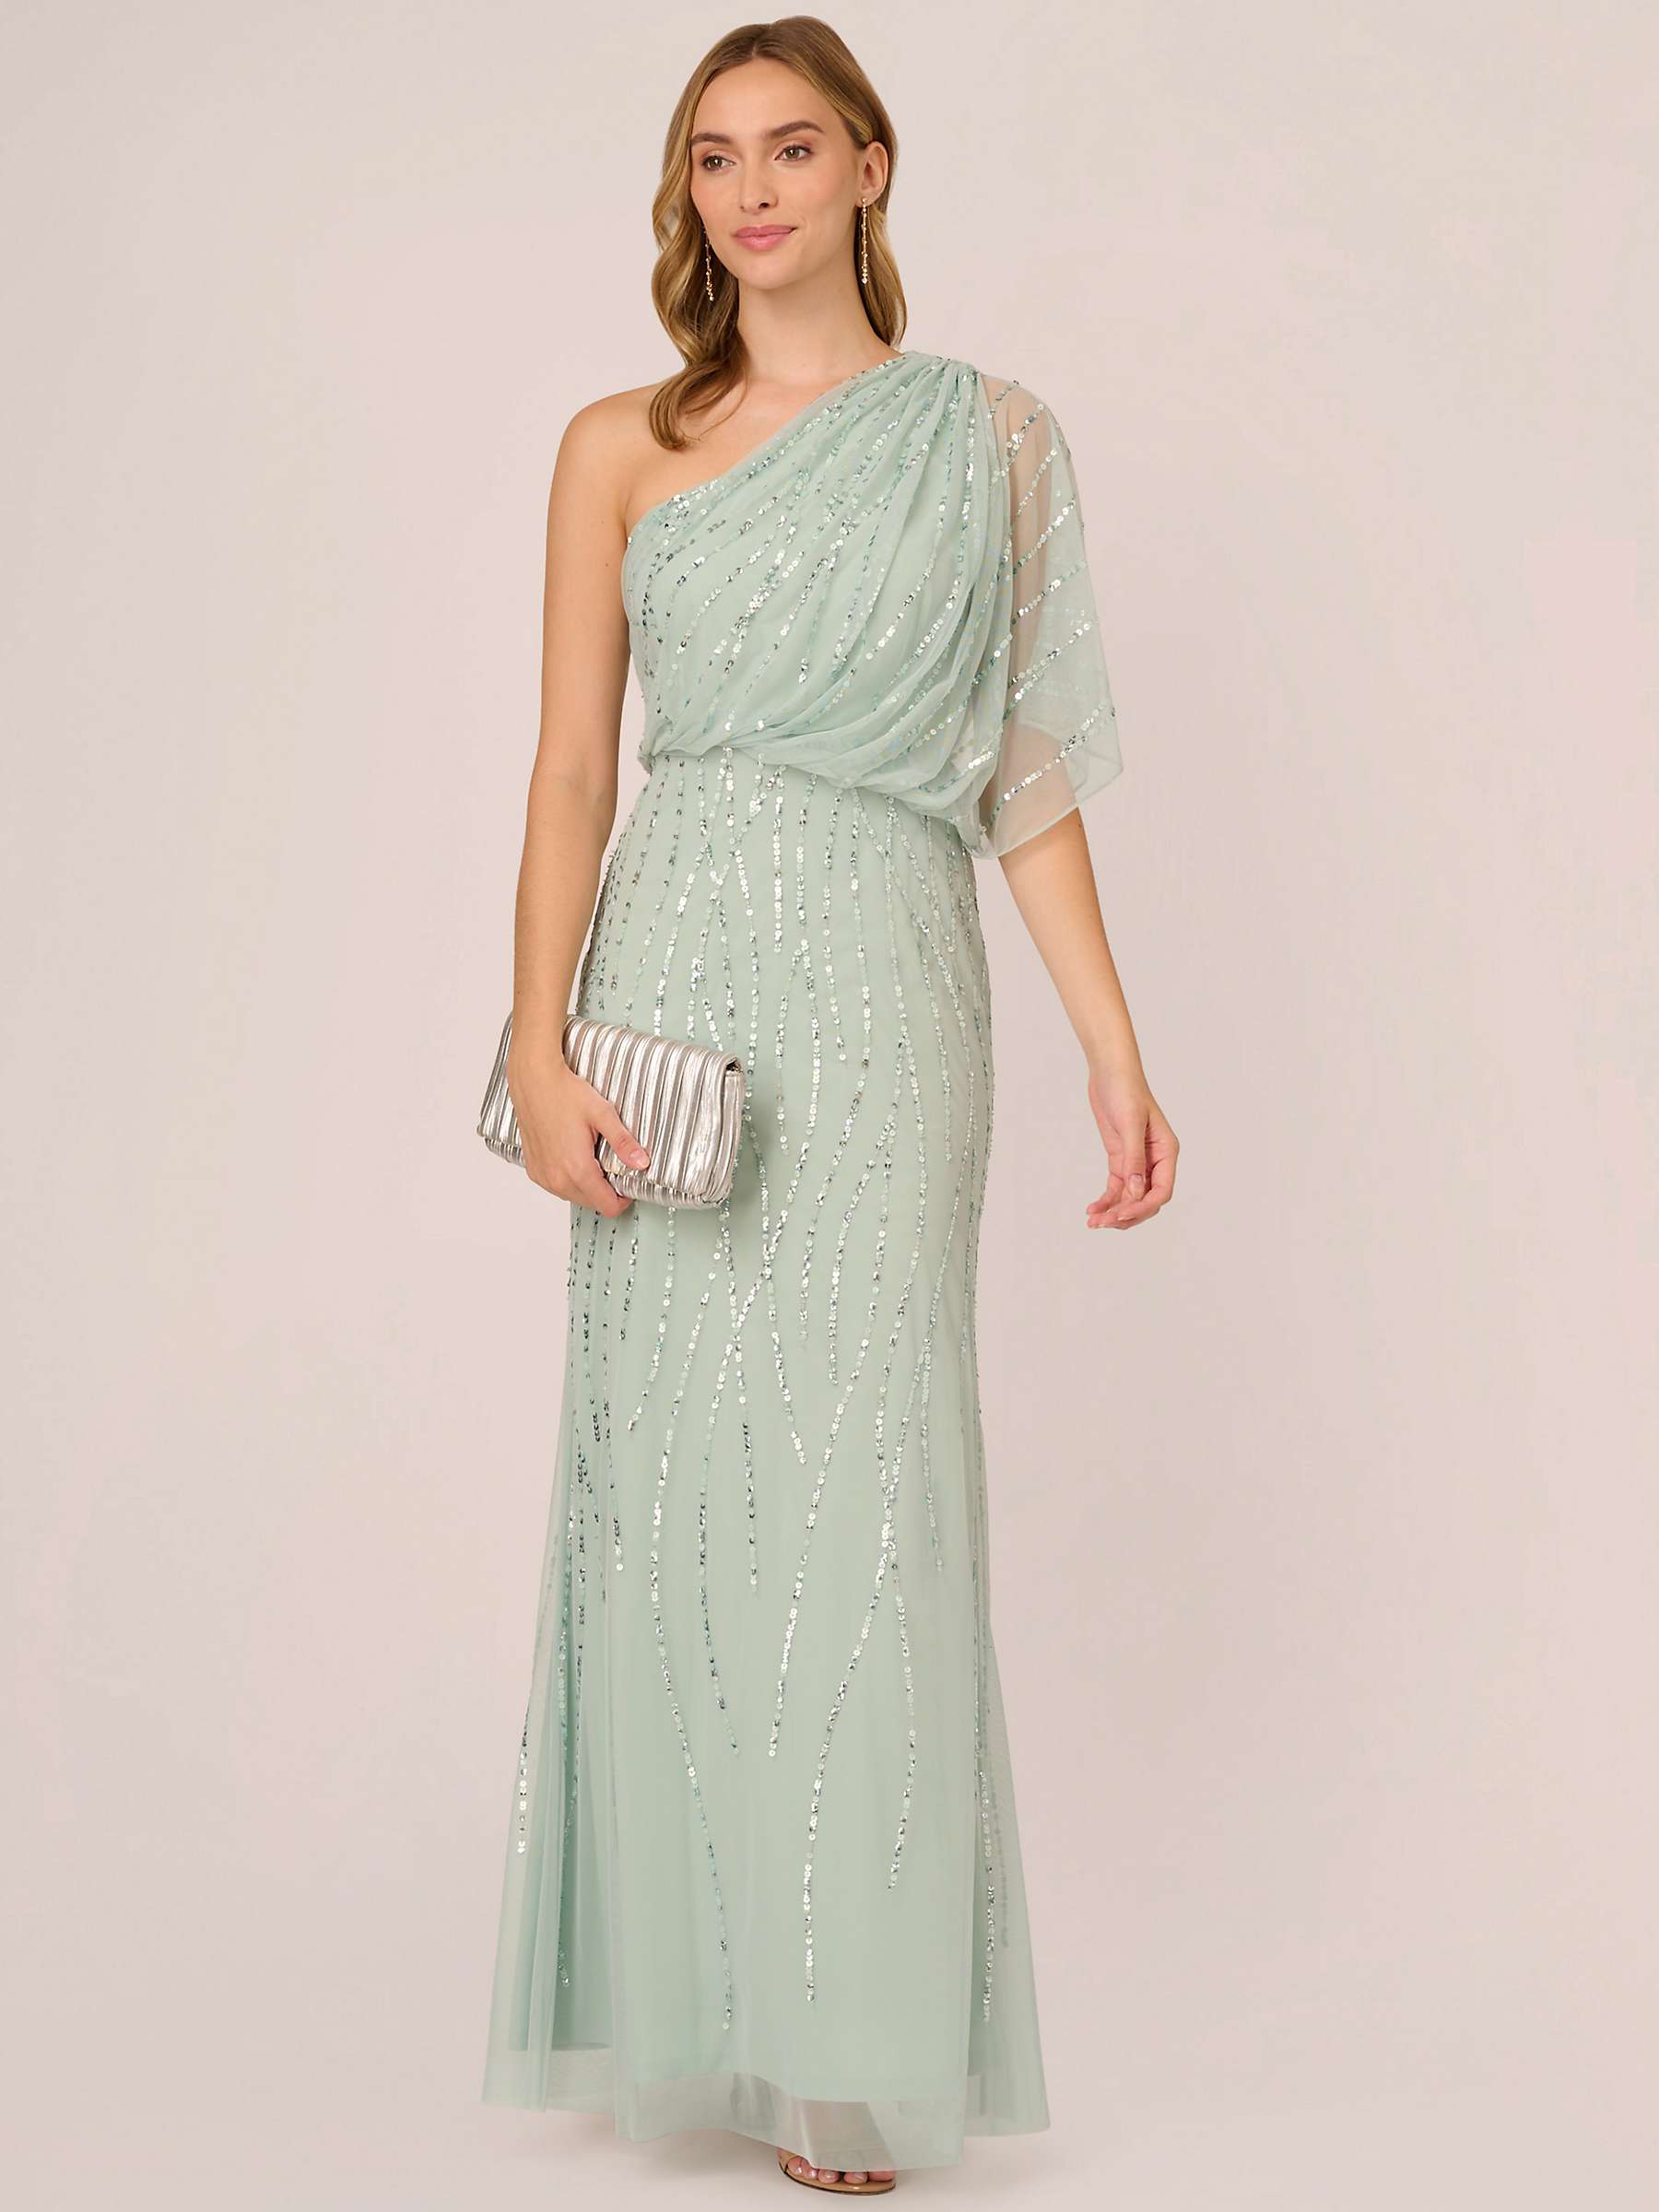 Buy Adrianna Papell Long Beaded Dress, Icy Sage Online at johnlewis.com